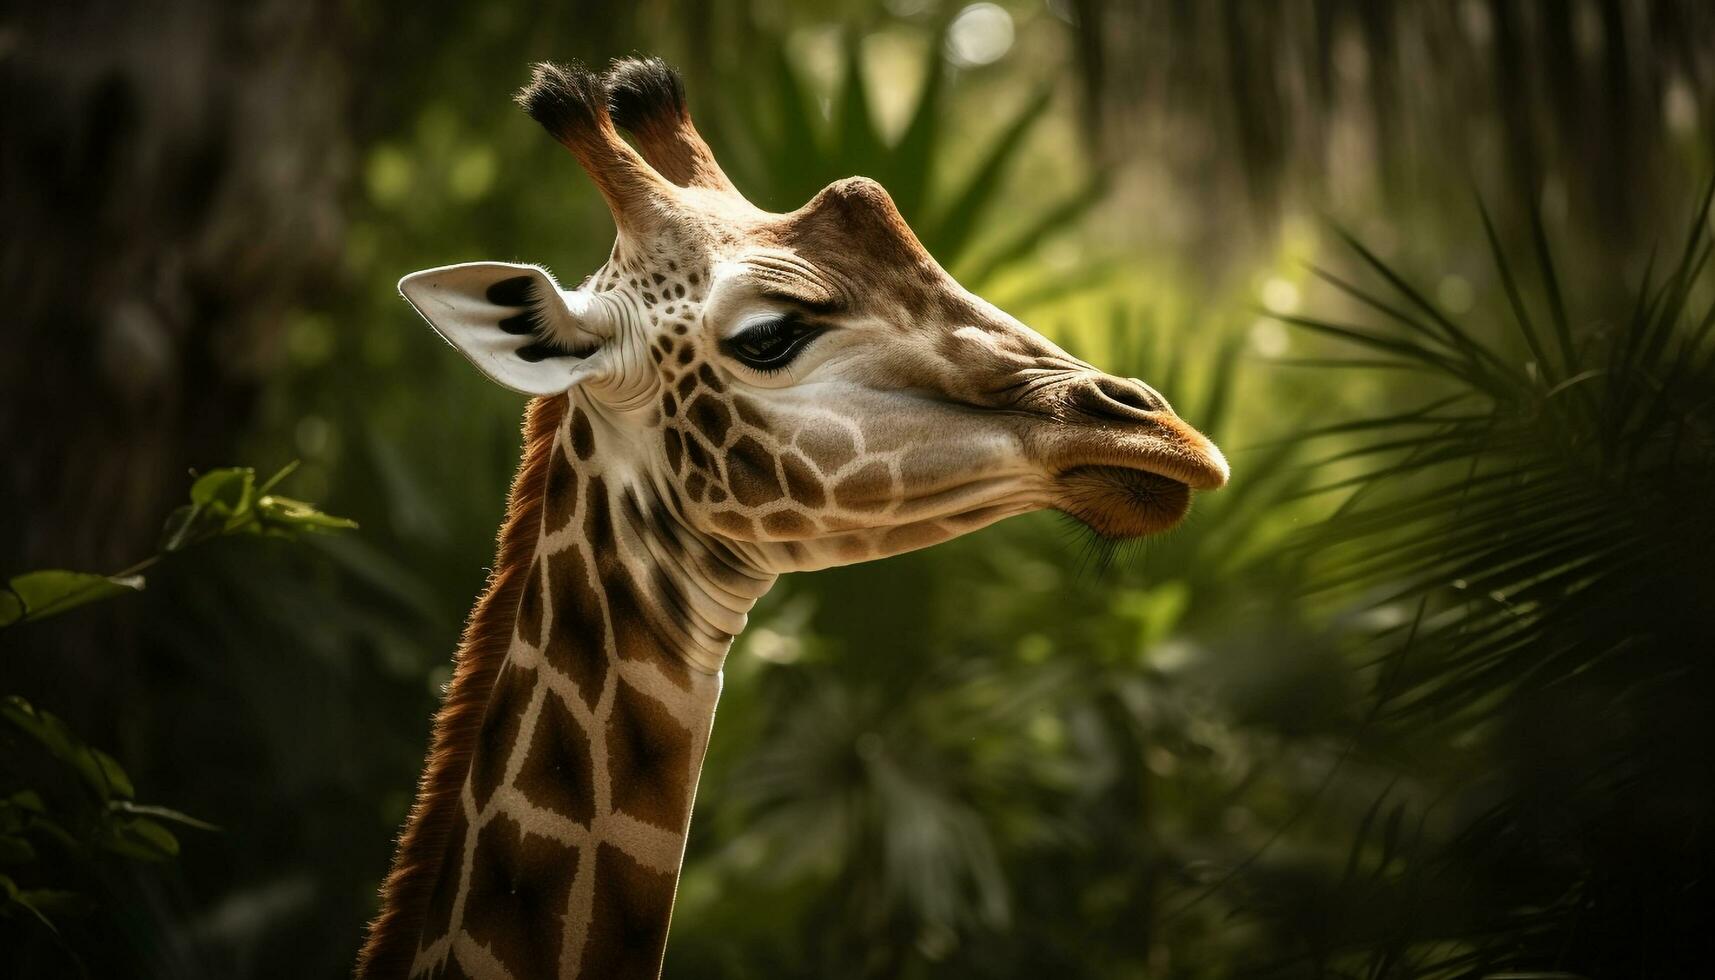 Giraffe in nature, close up, looking at camera, standing in grass generated by AI photo